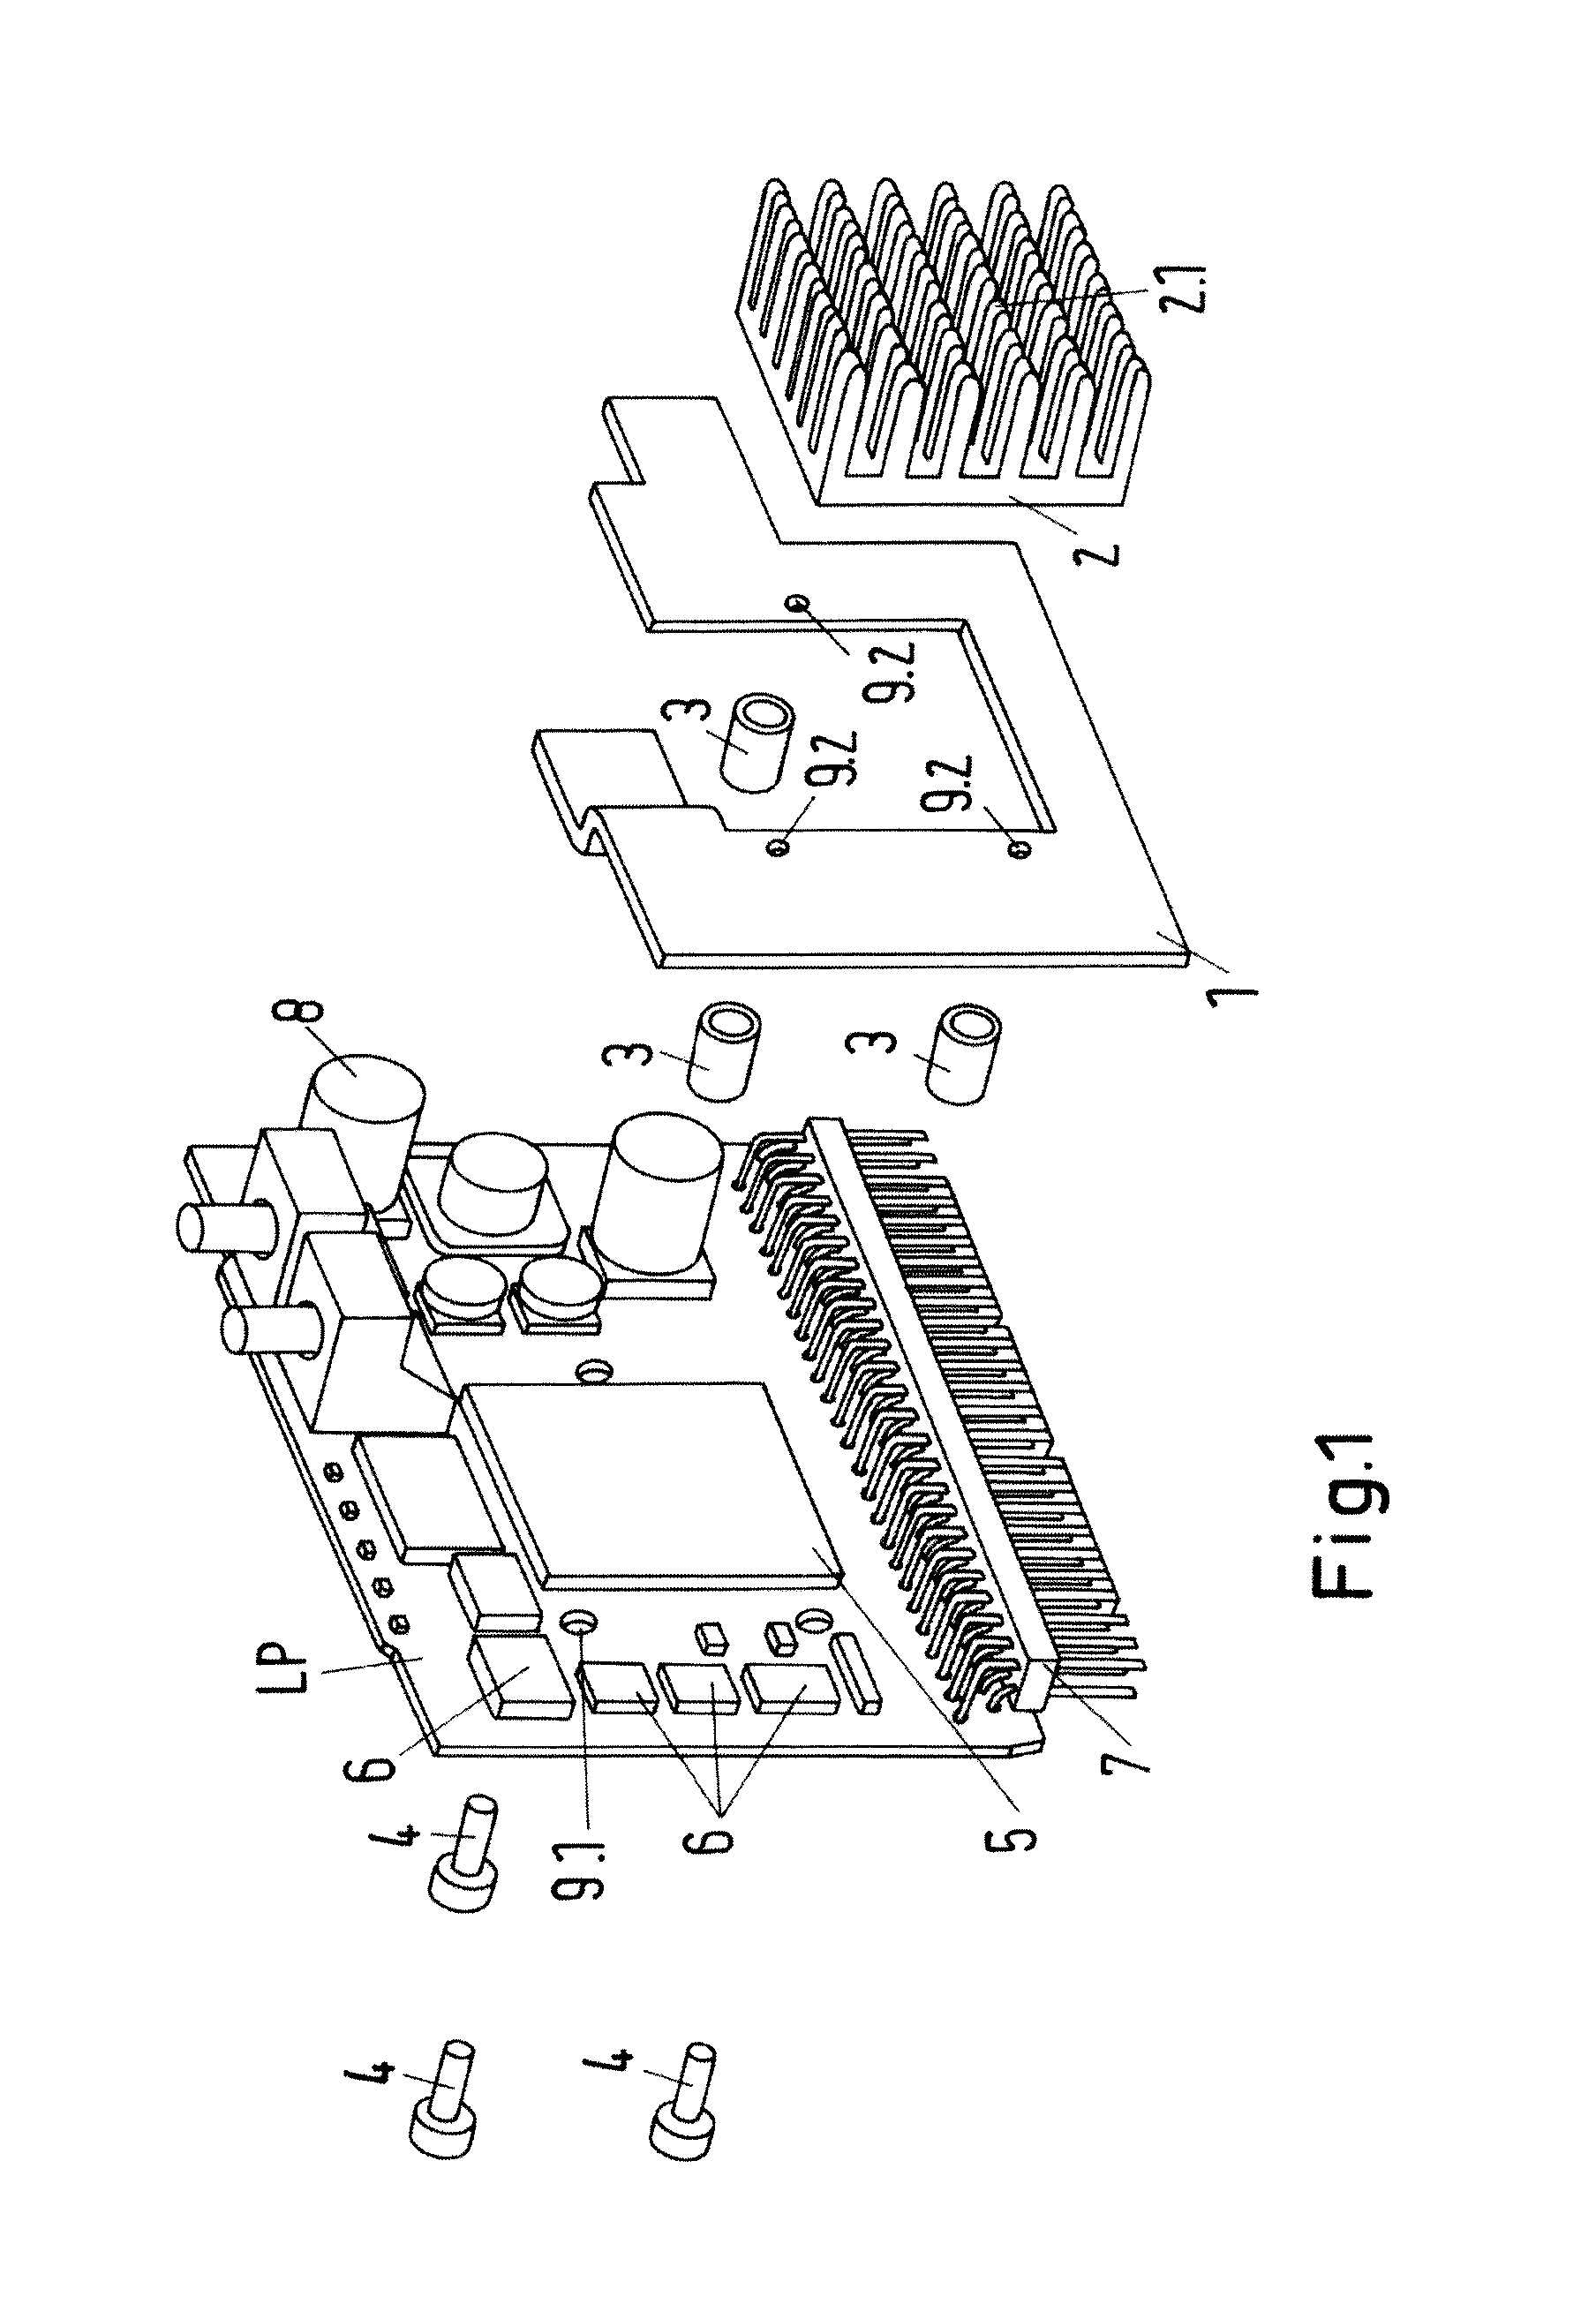 Arrangement for cooling subassemblies of an automation or control system